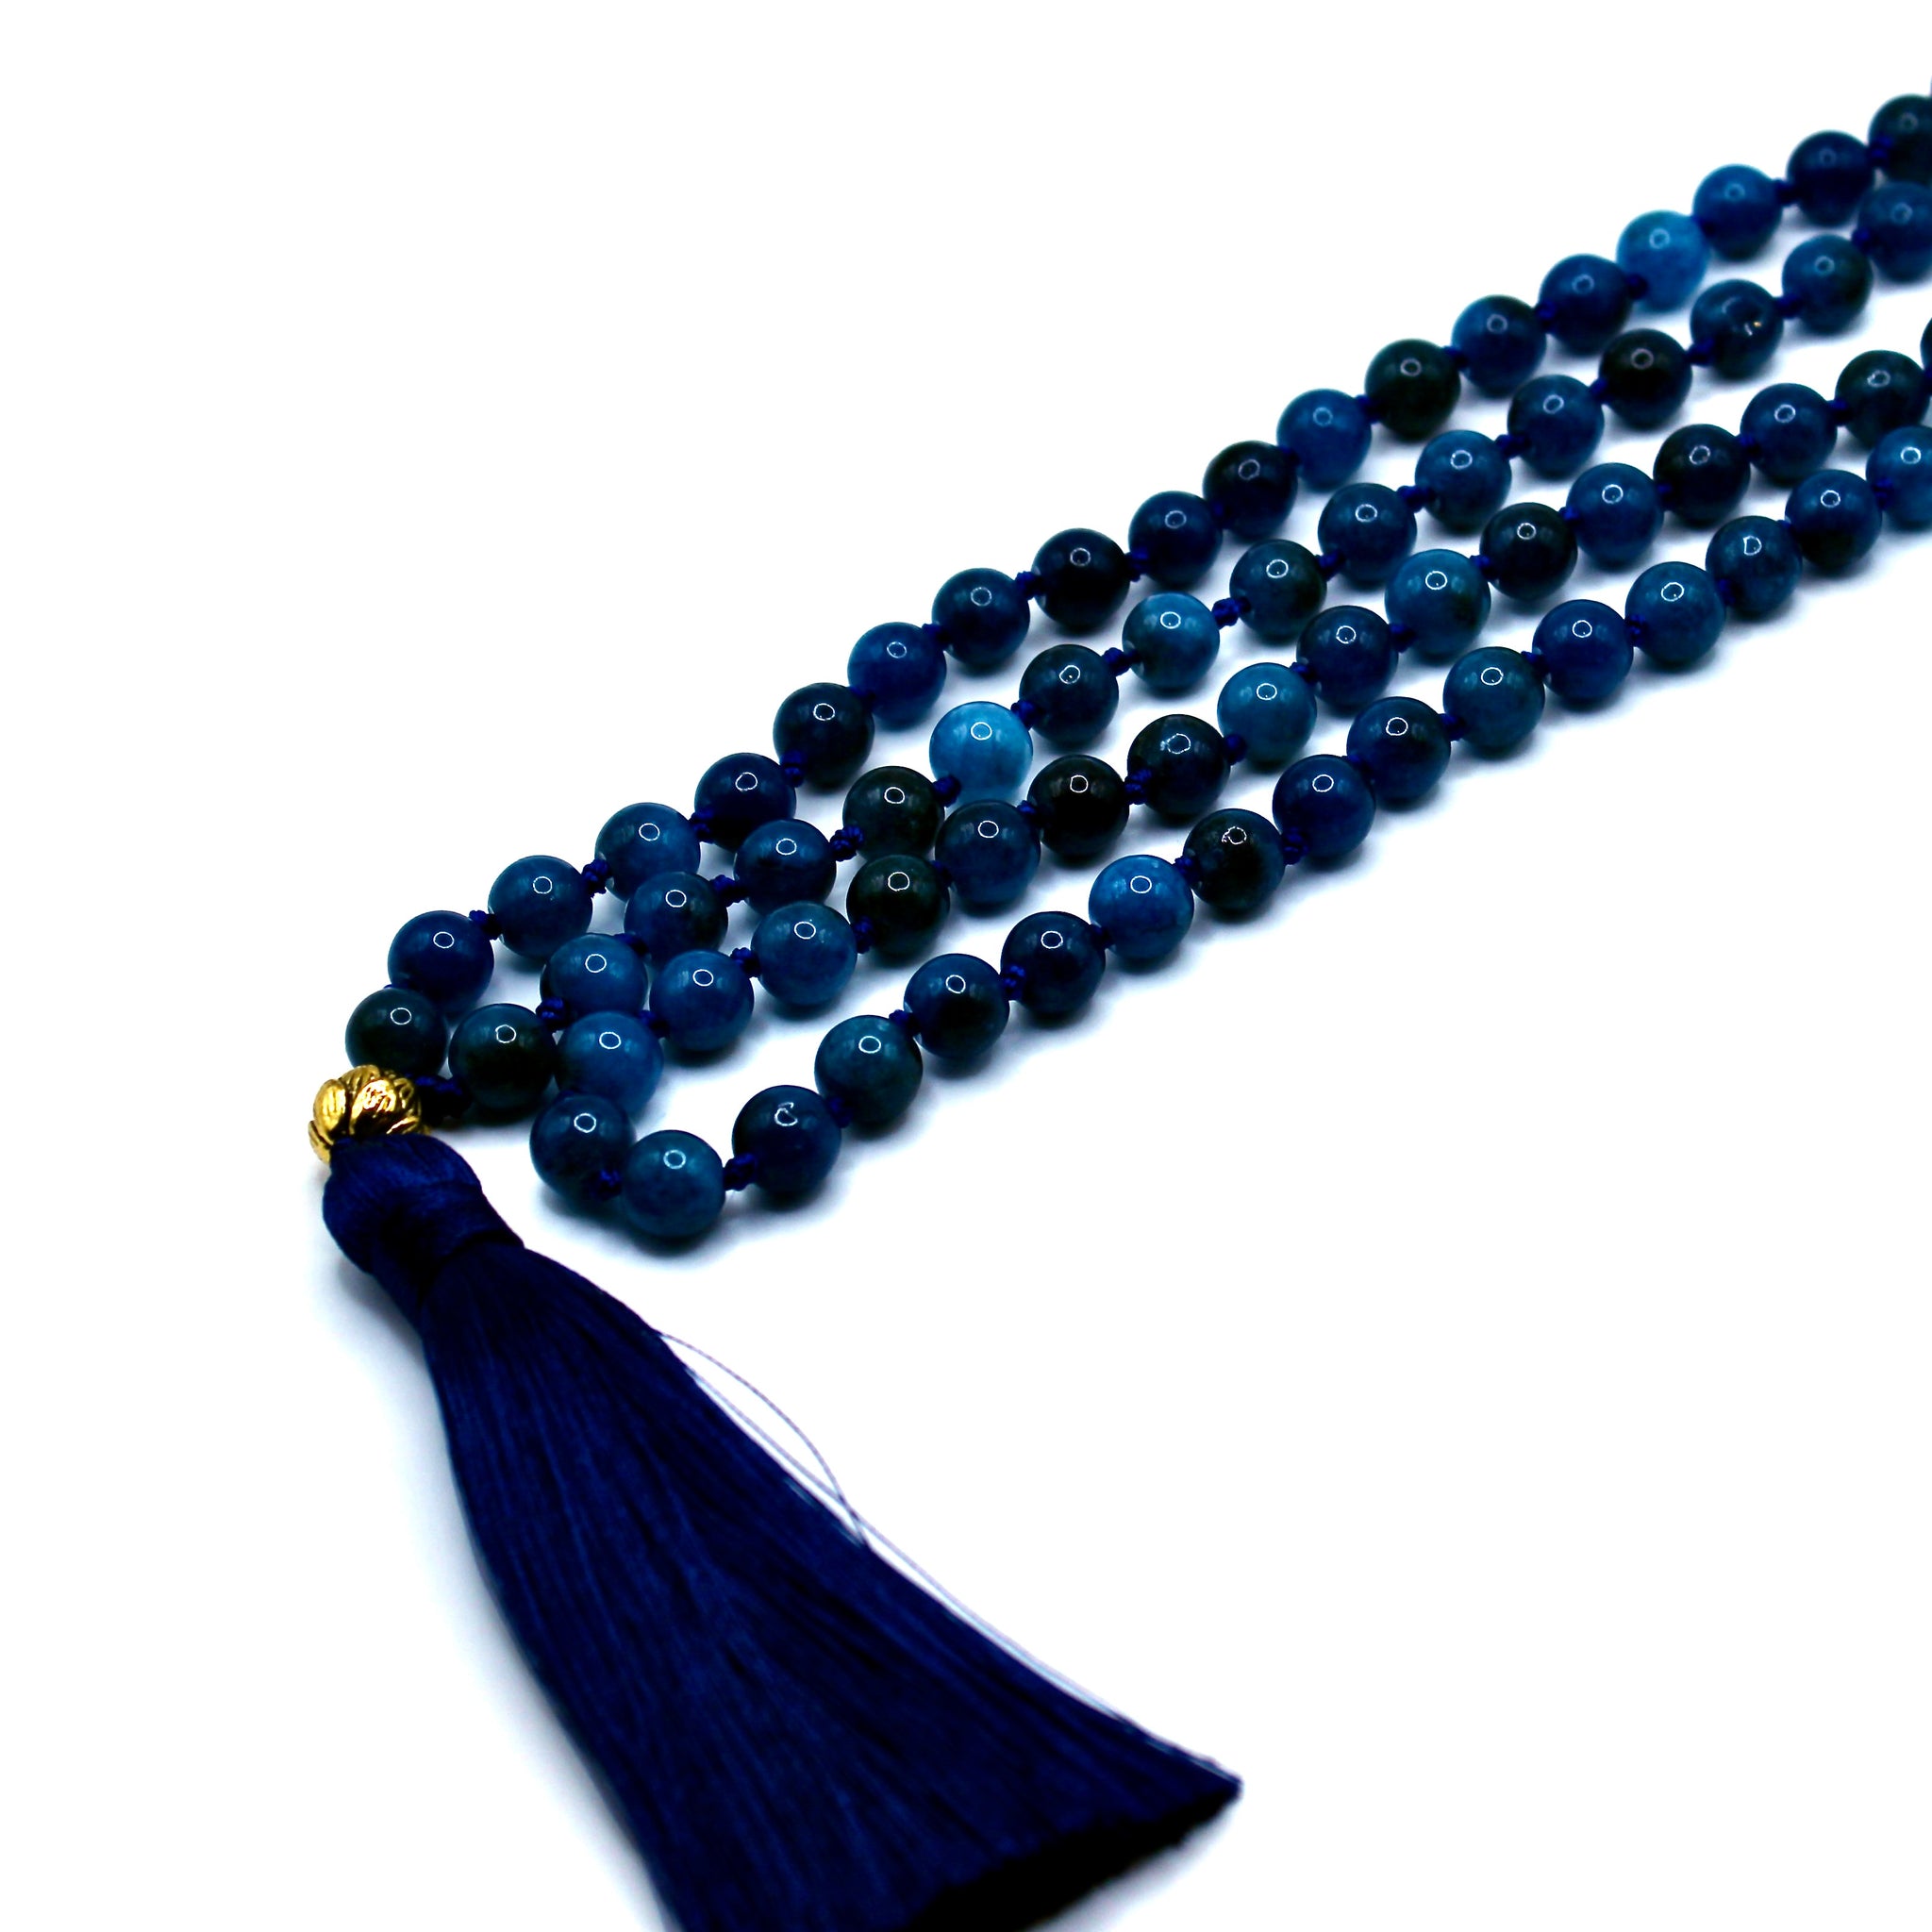 108 Natural Gemstone Blue Apatite Knotted Mala Necklace with Silk Tassel